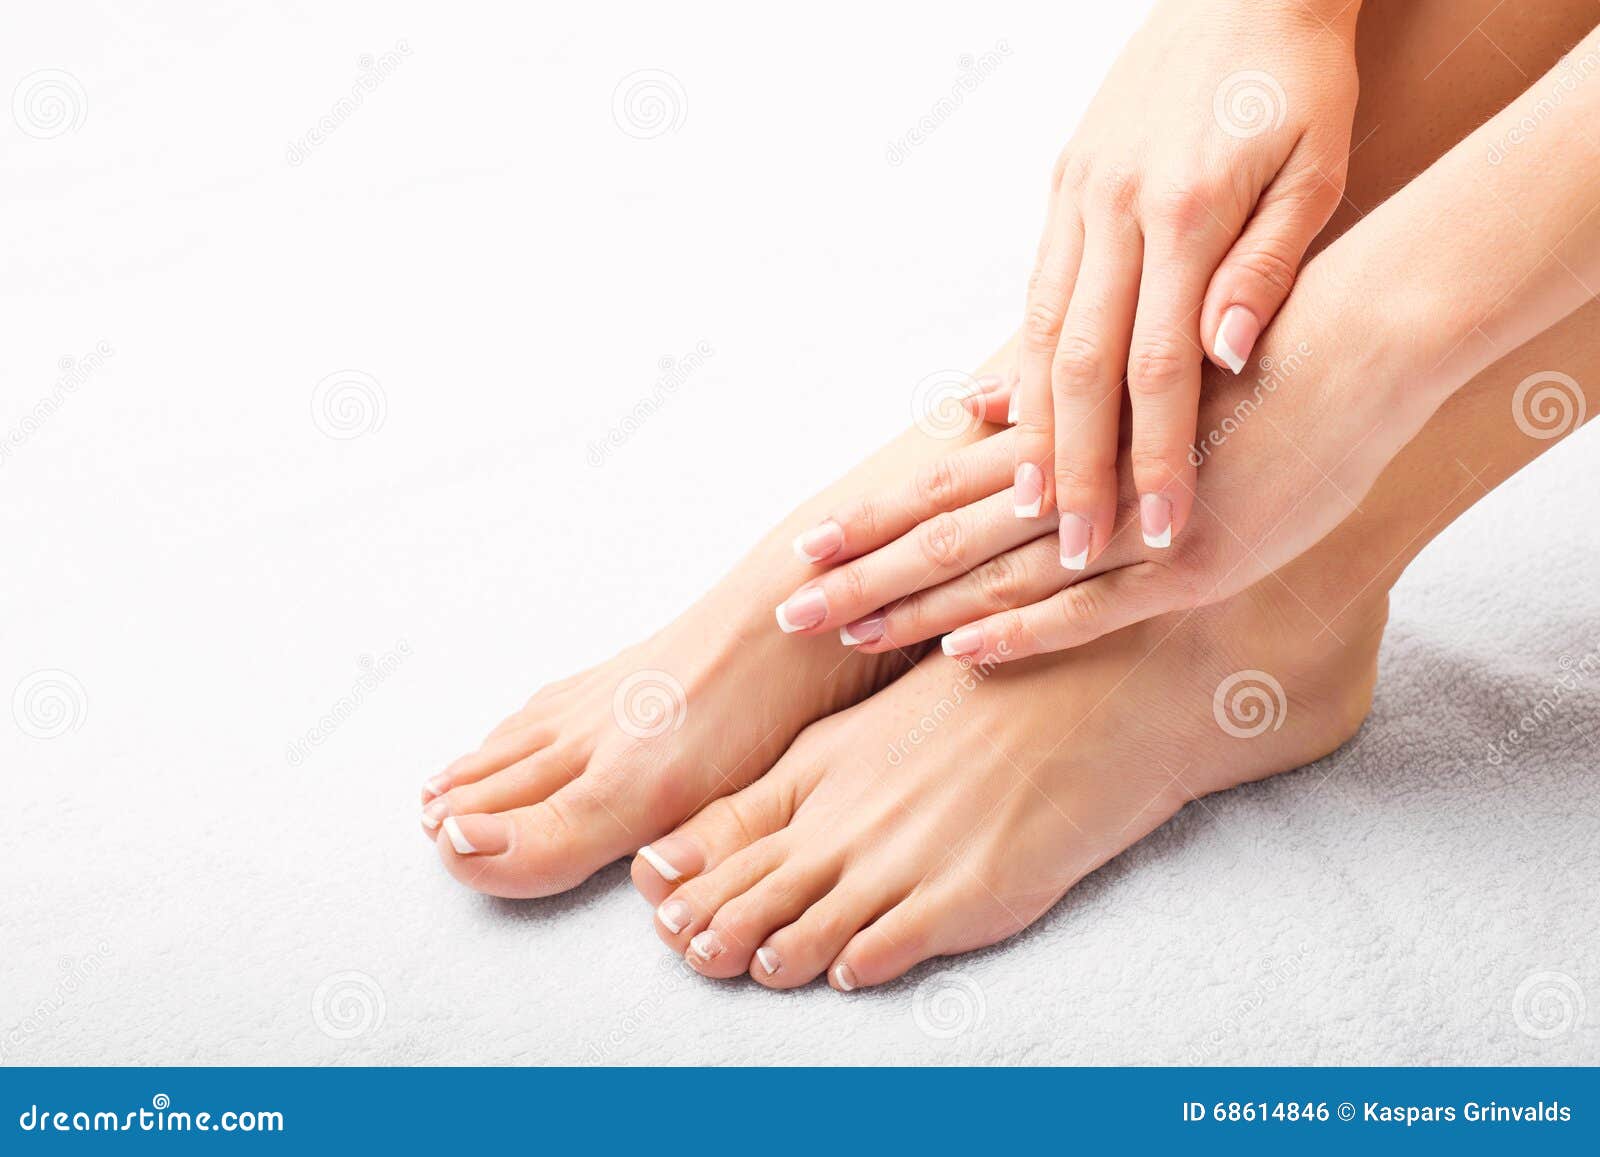 woman after manicure and pedicure